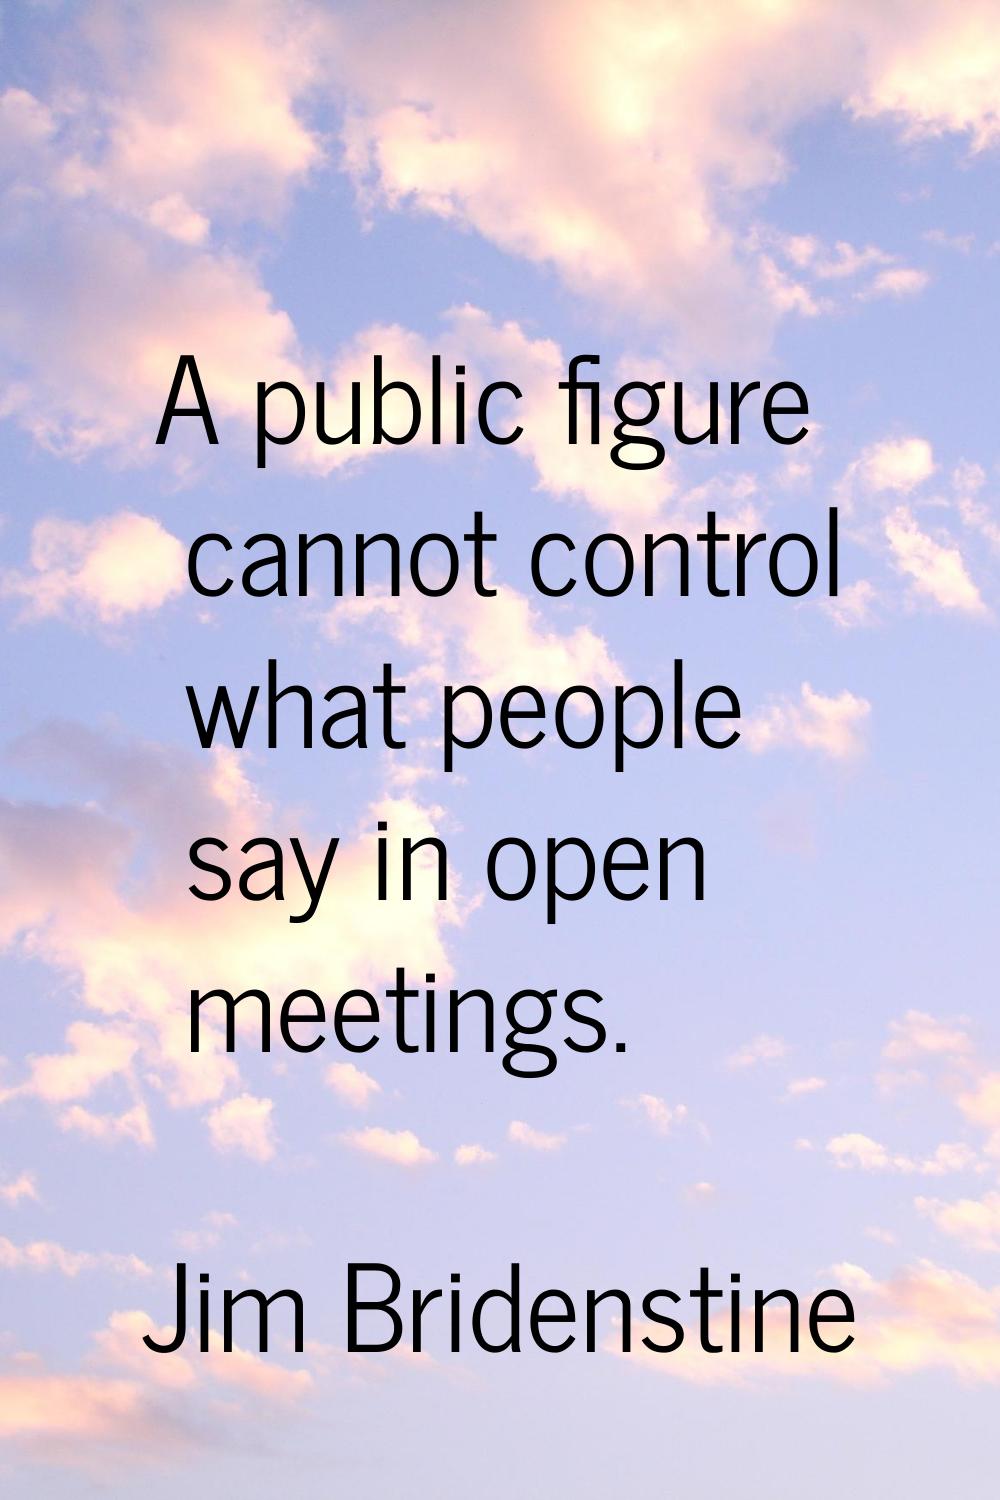 A public figure cannot control what people say in open meetings.